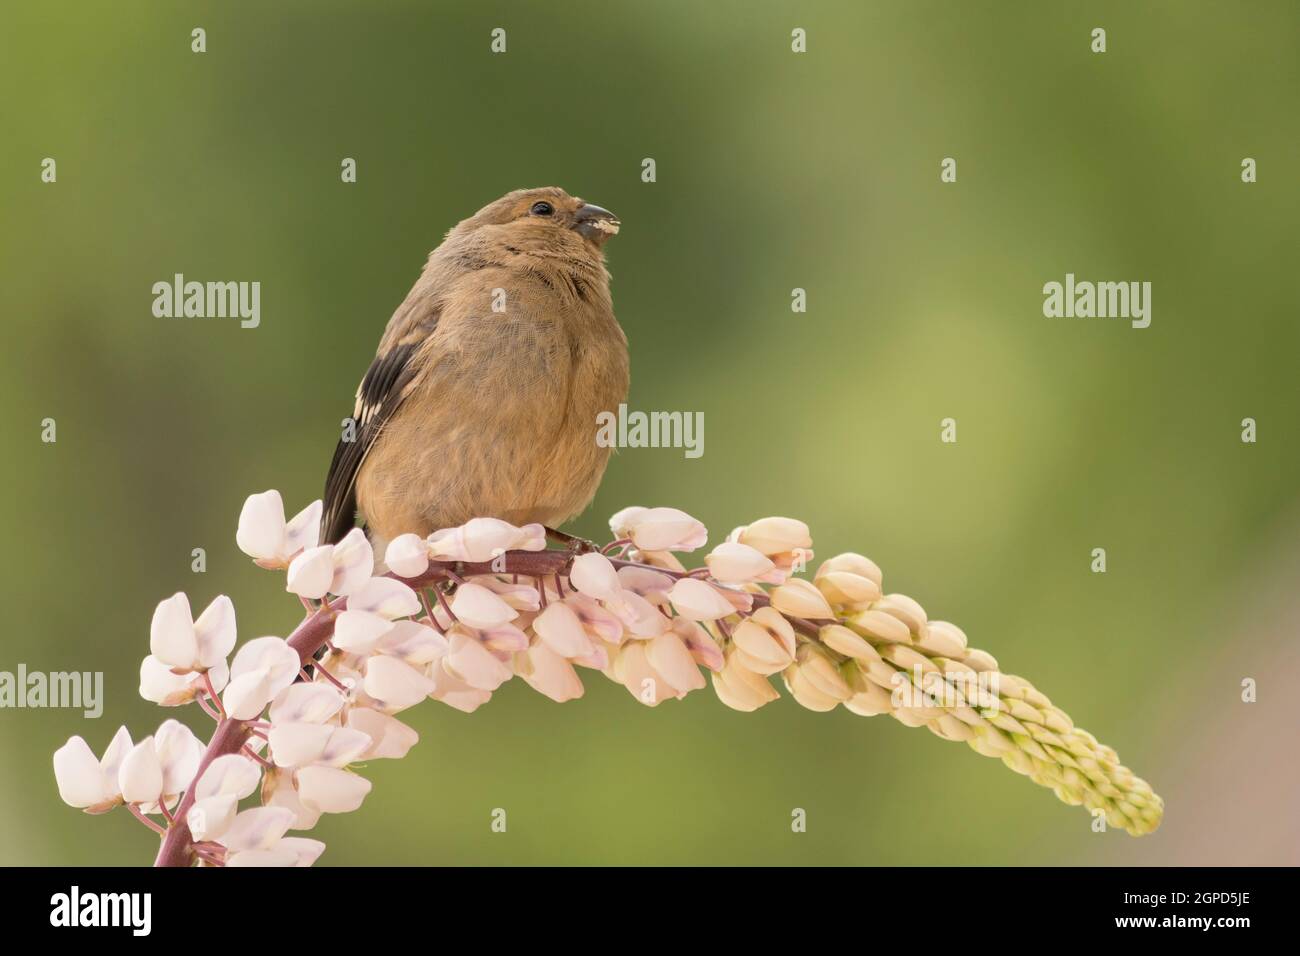 close up of a young bullfinch standing on a lupine Stock Photo